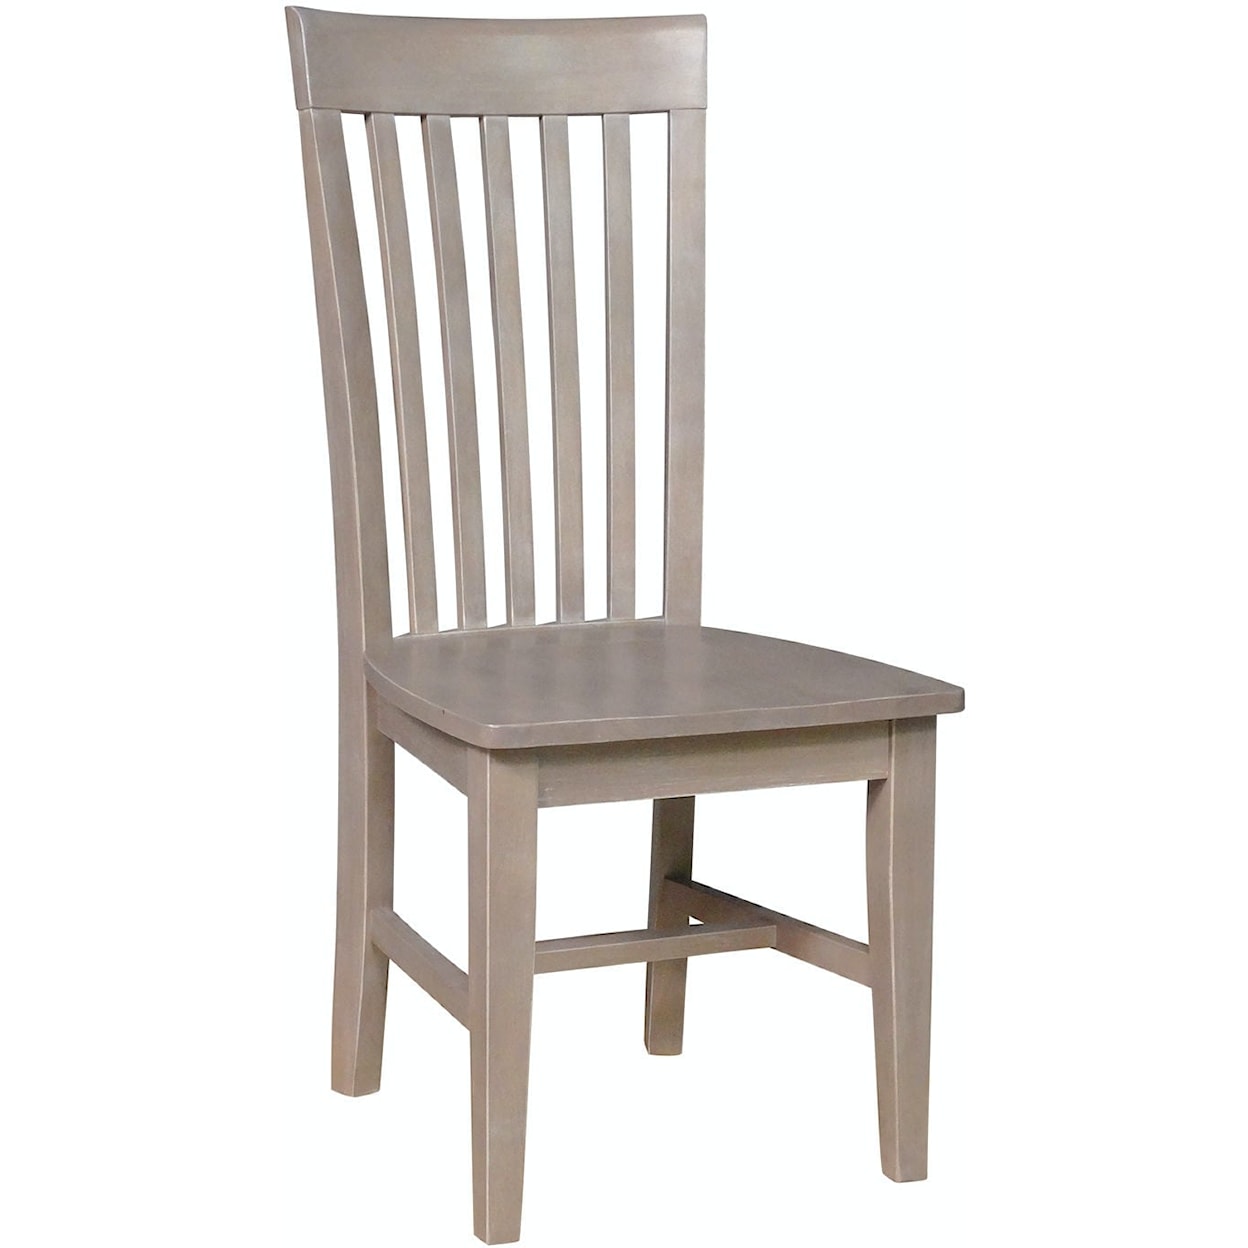 John Thomas Cosmopolitan Tall Mission Chair in Taupe Gray